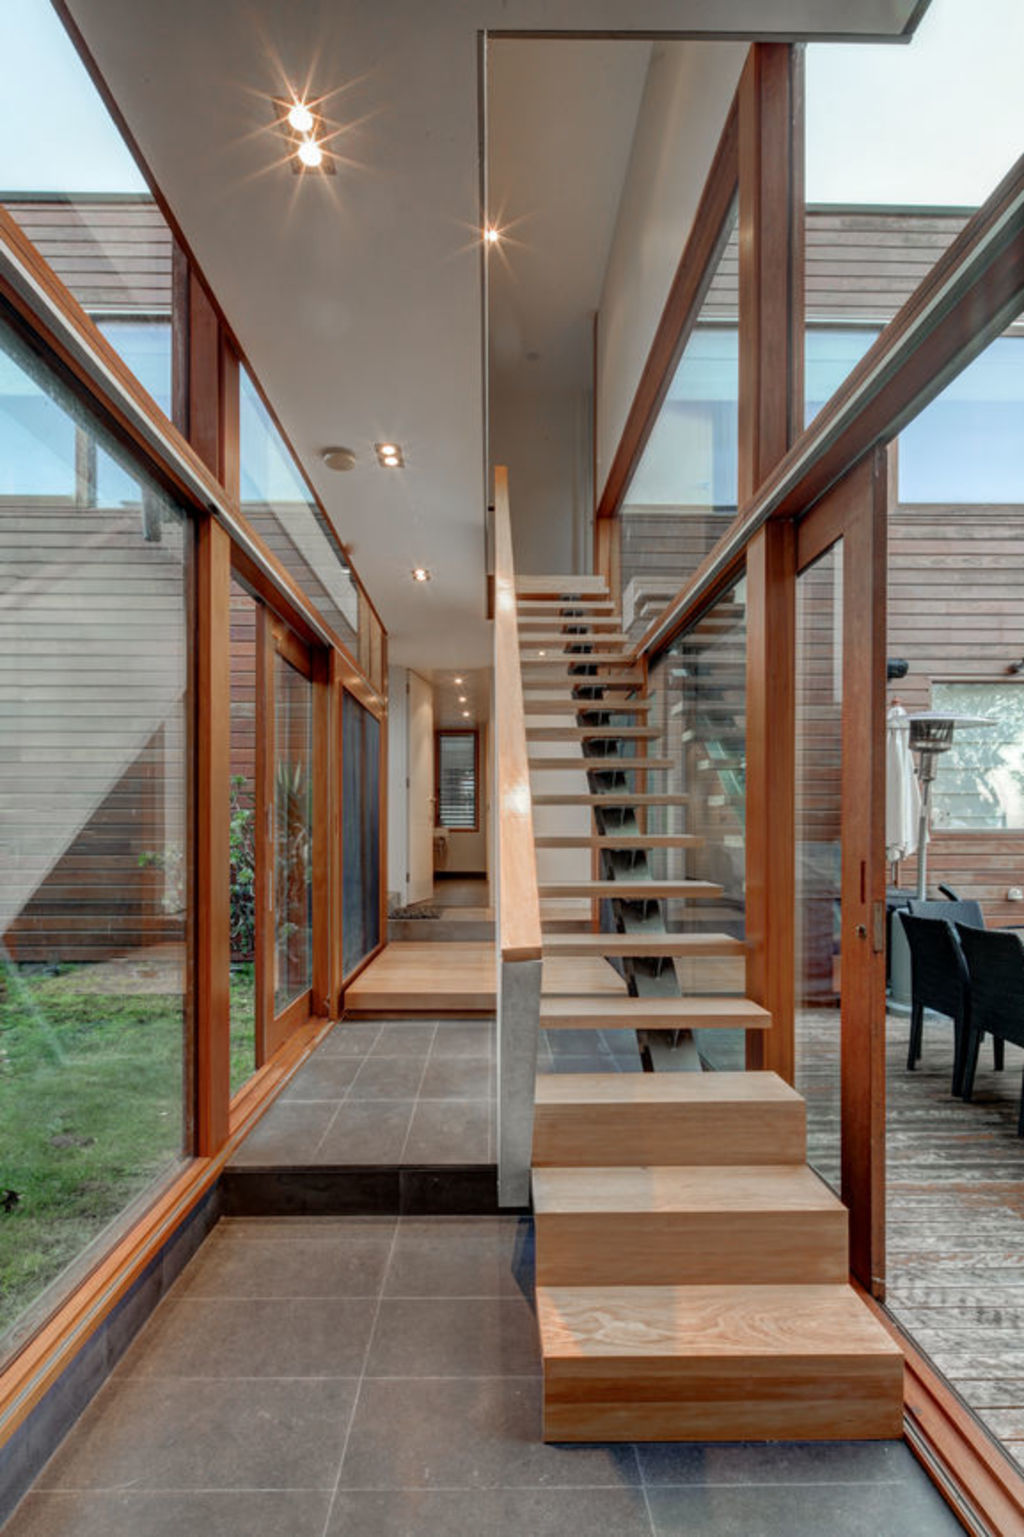 Light, bright, clean and airy spaces are great for mental clarity. Photo: Stocksy